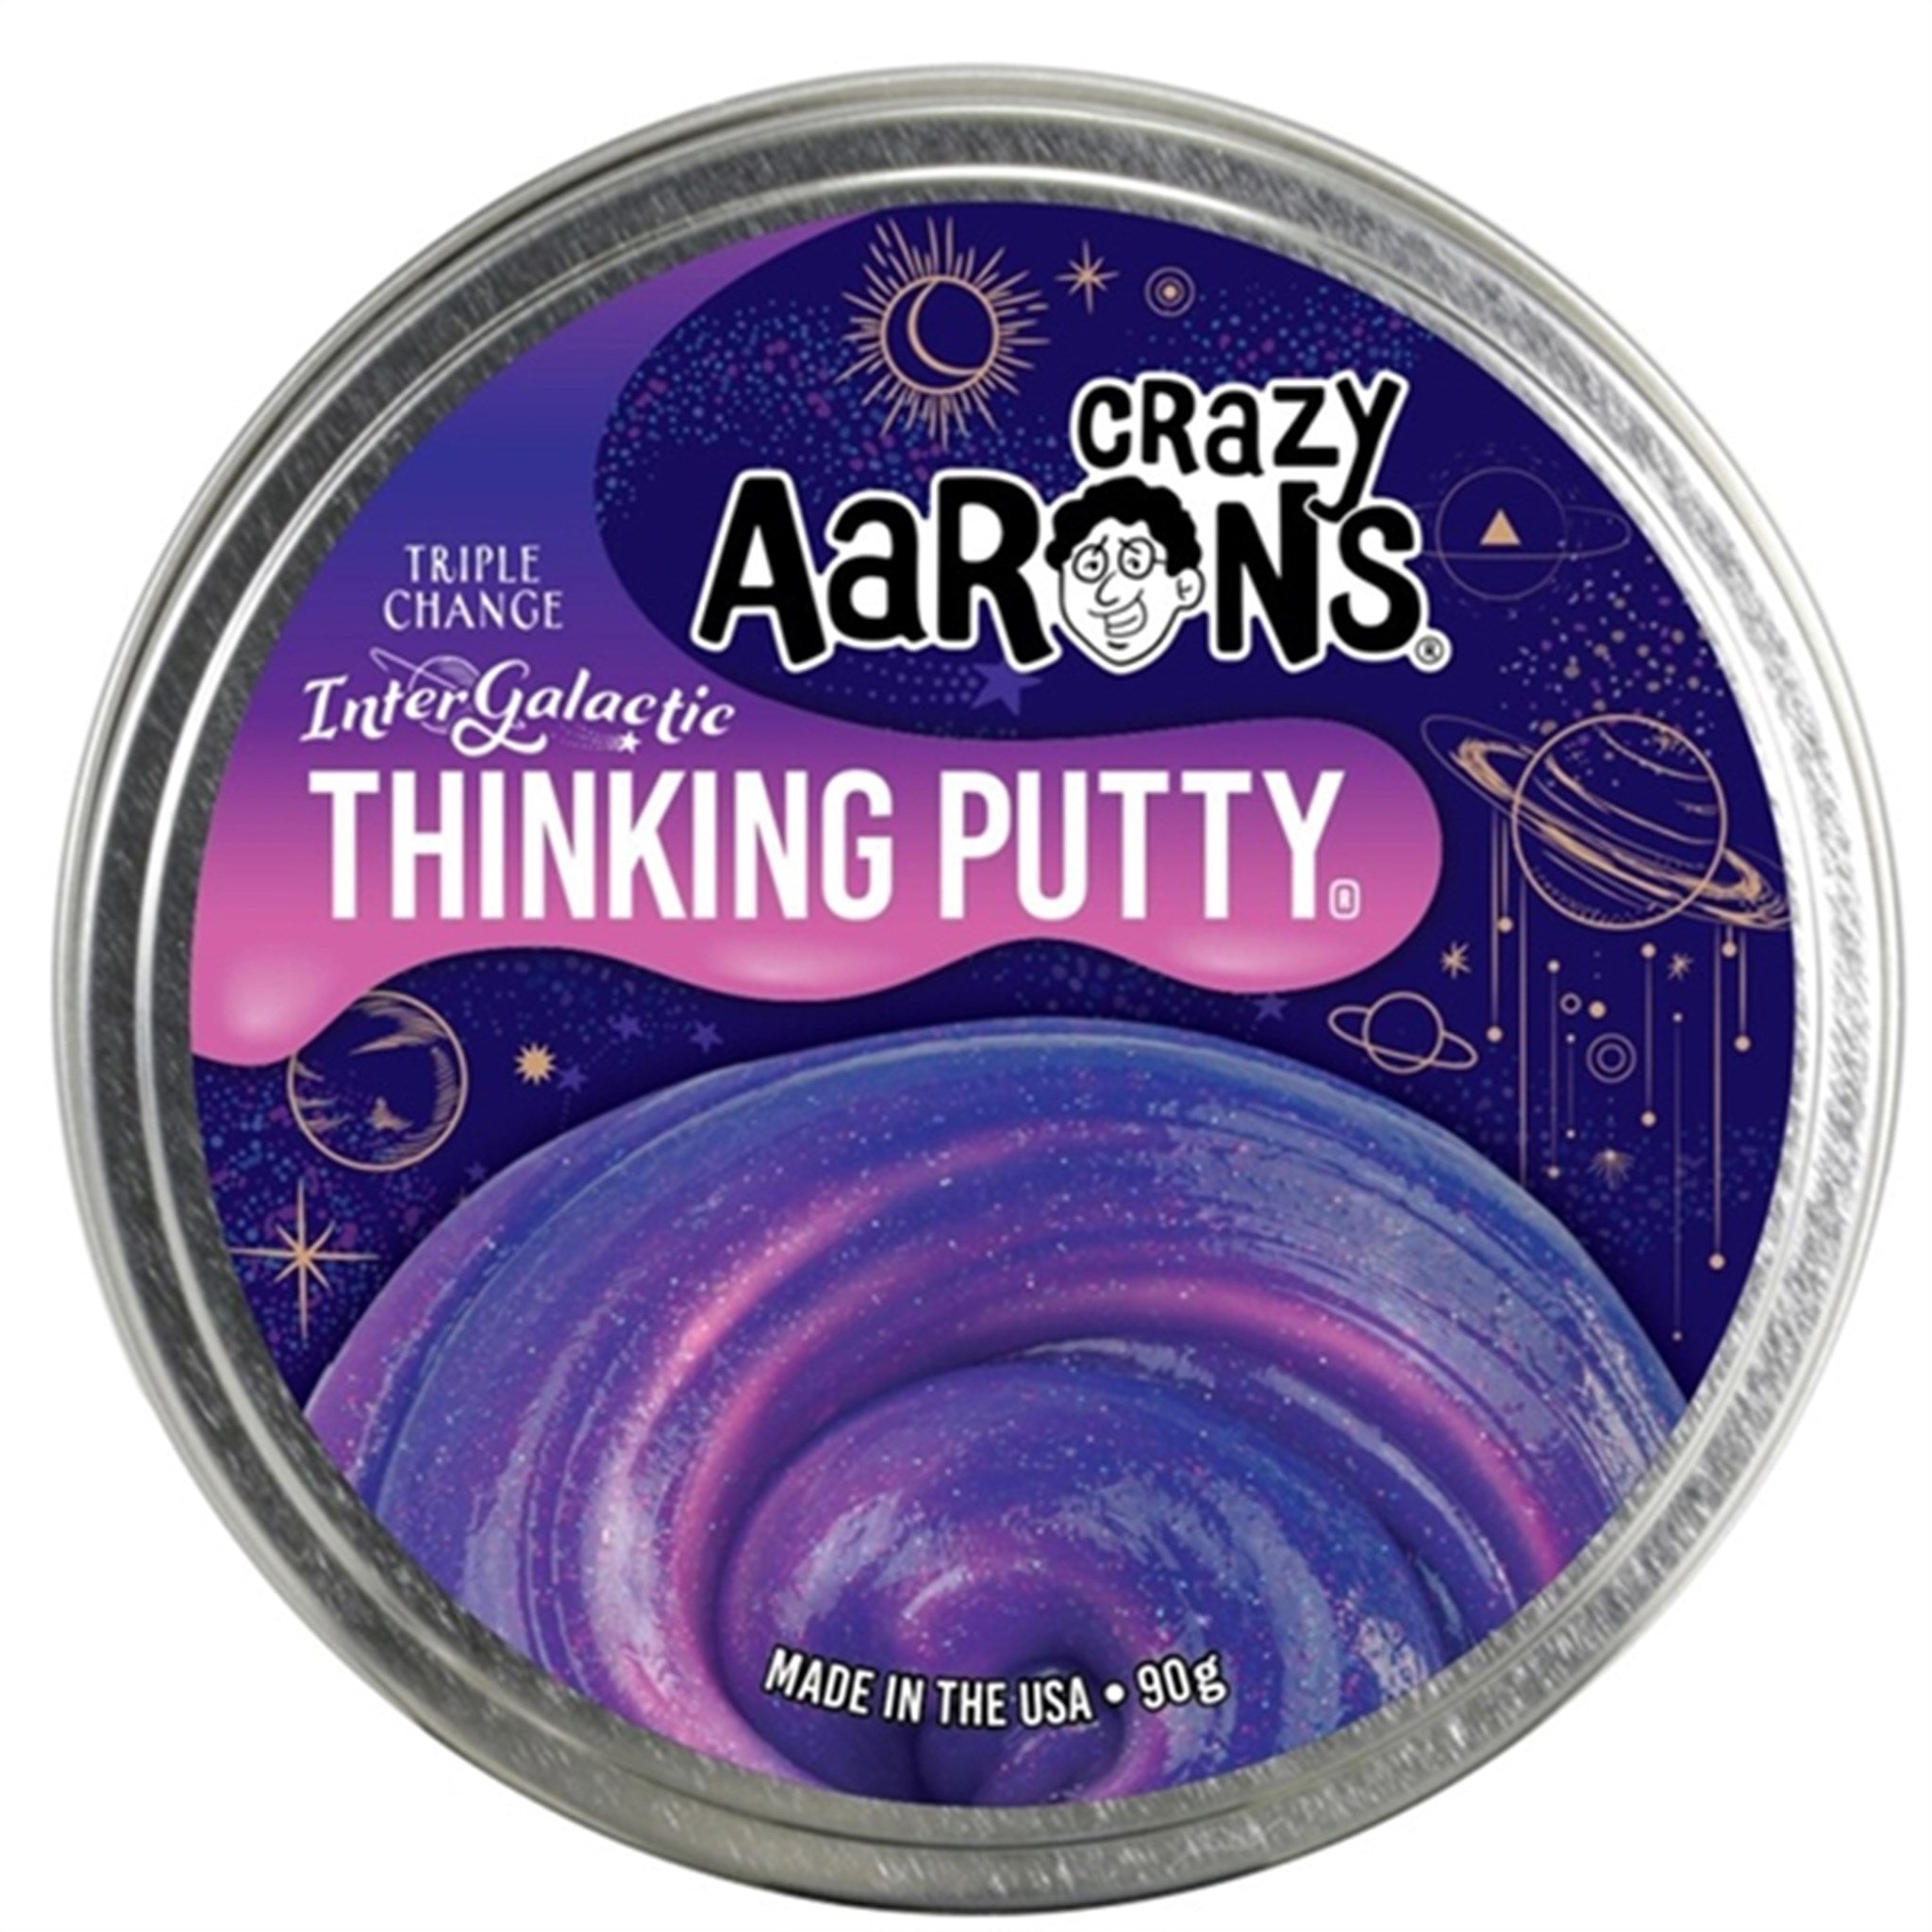 Crazy Aaron's® Slim - Thinking Putty Trendsetters - Intergalactic